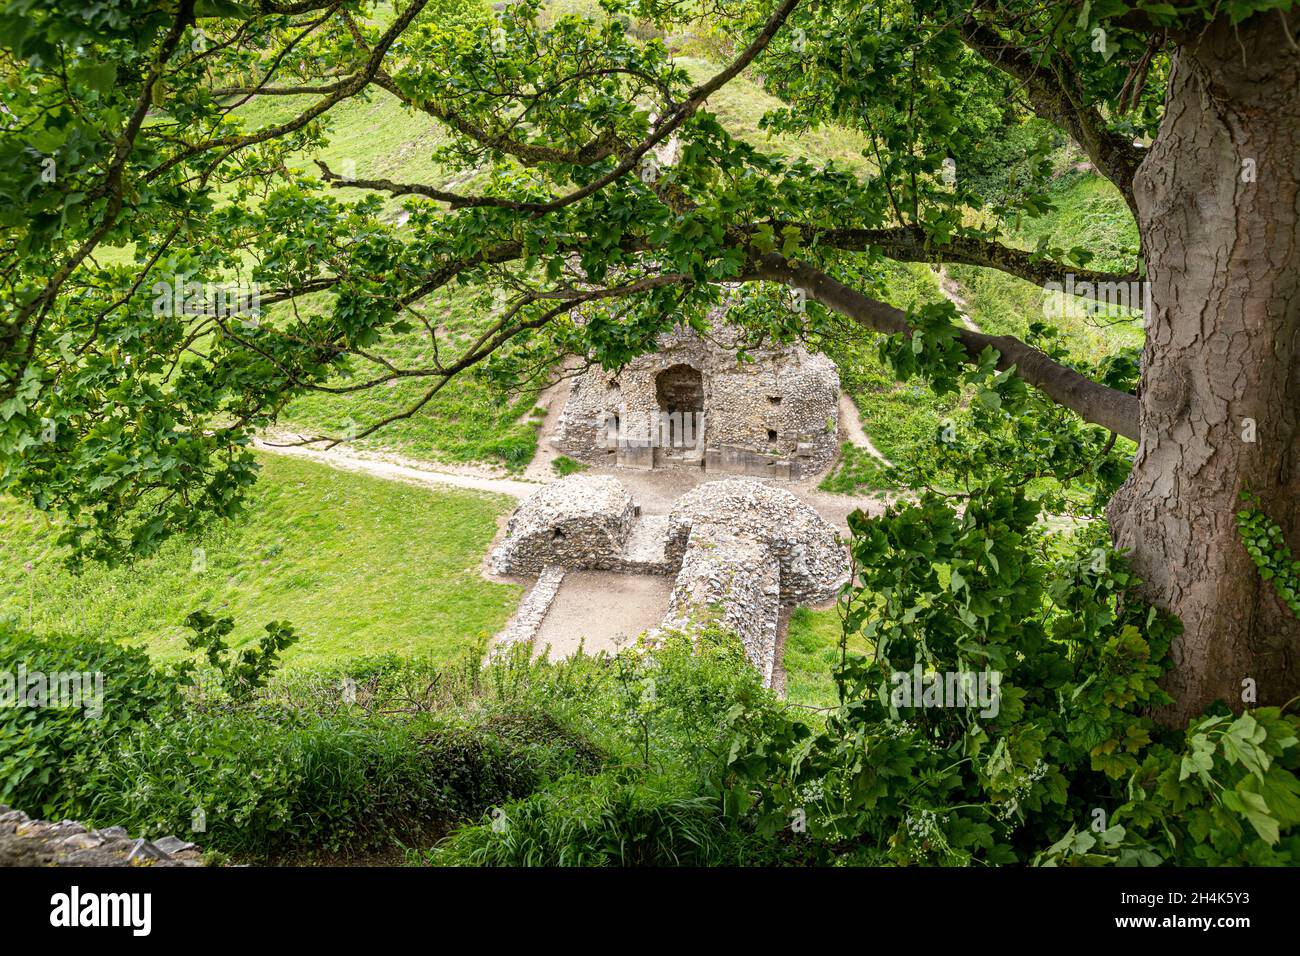 Part of the ruined medieval castle at Castle Acre, Norfolk UK Stock Photo